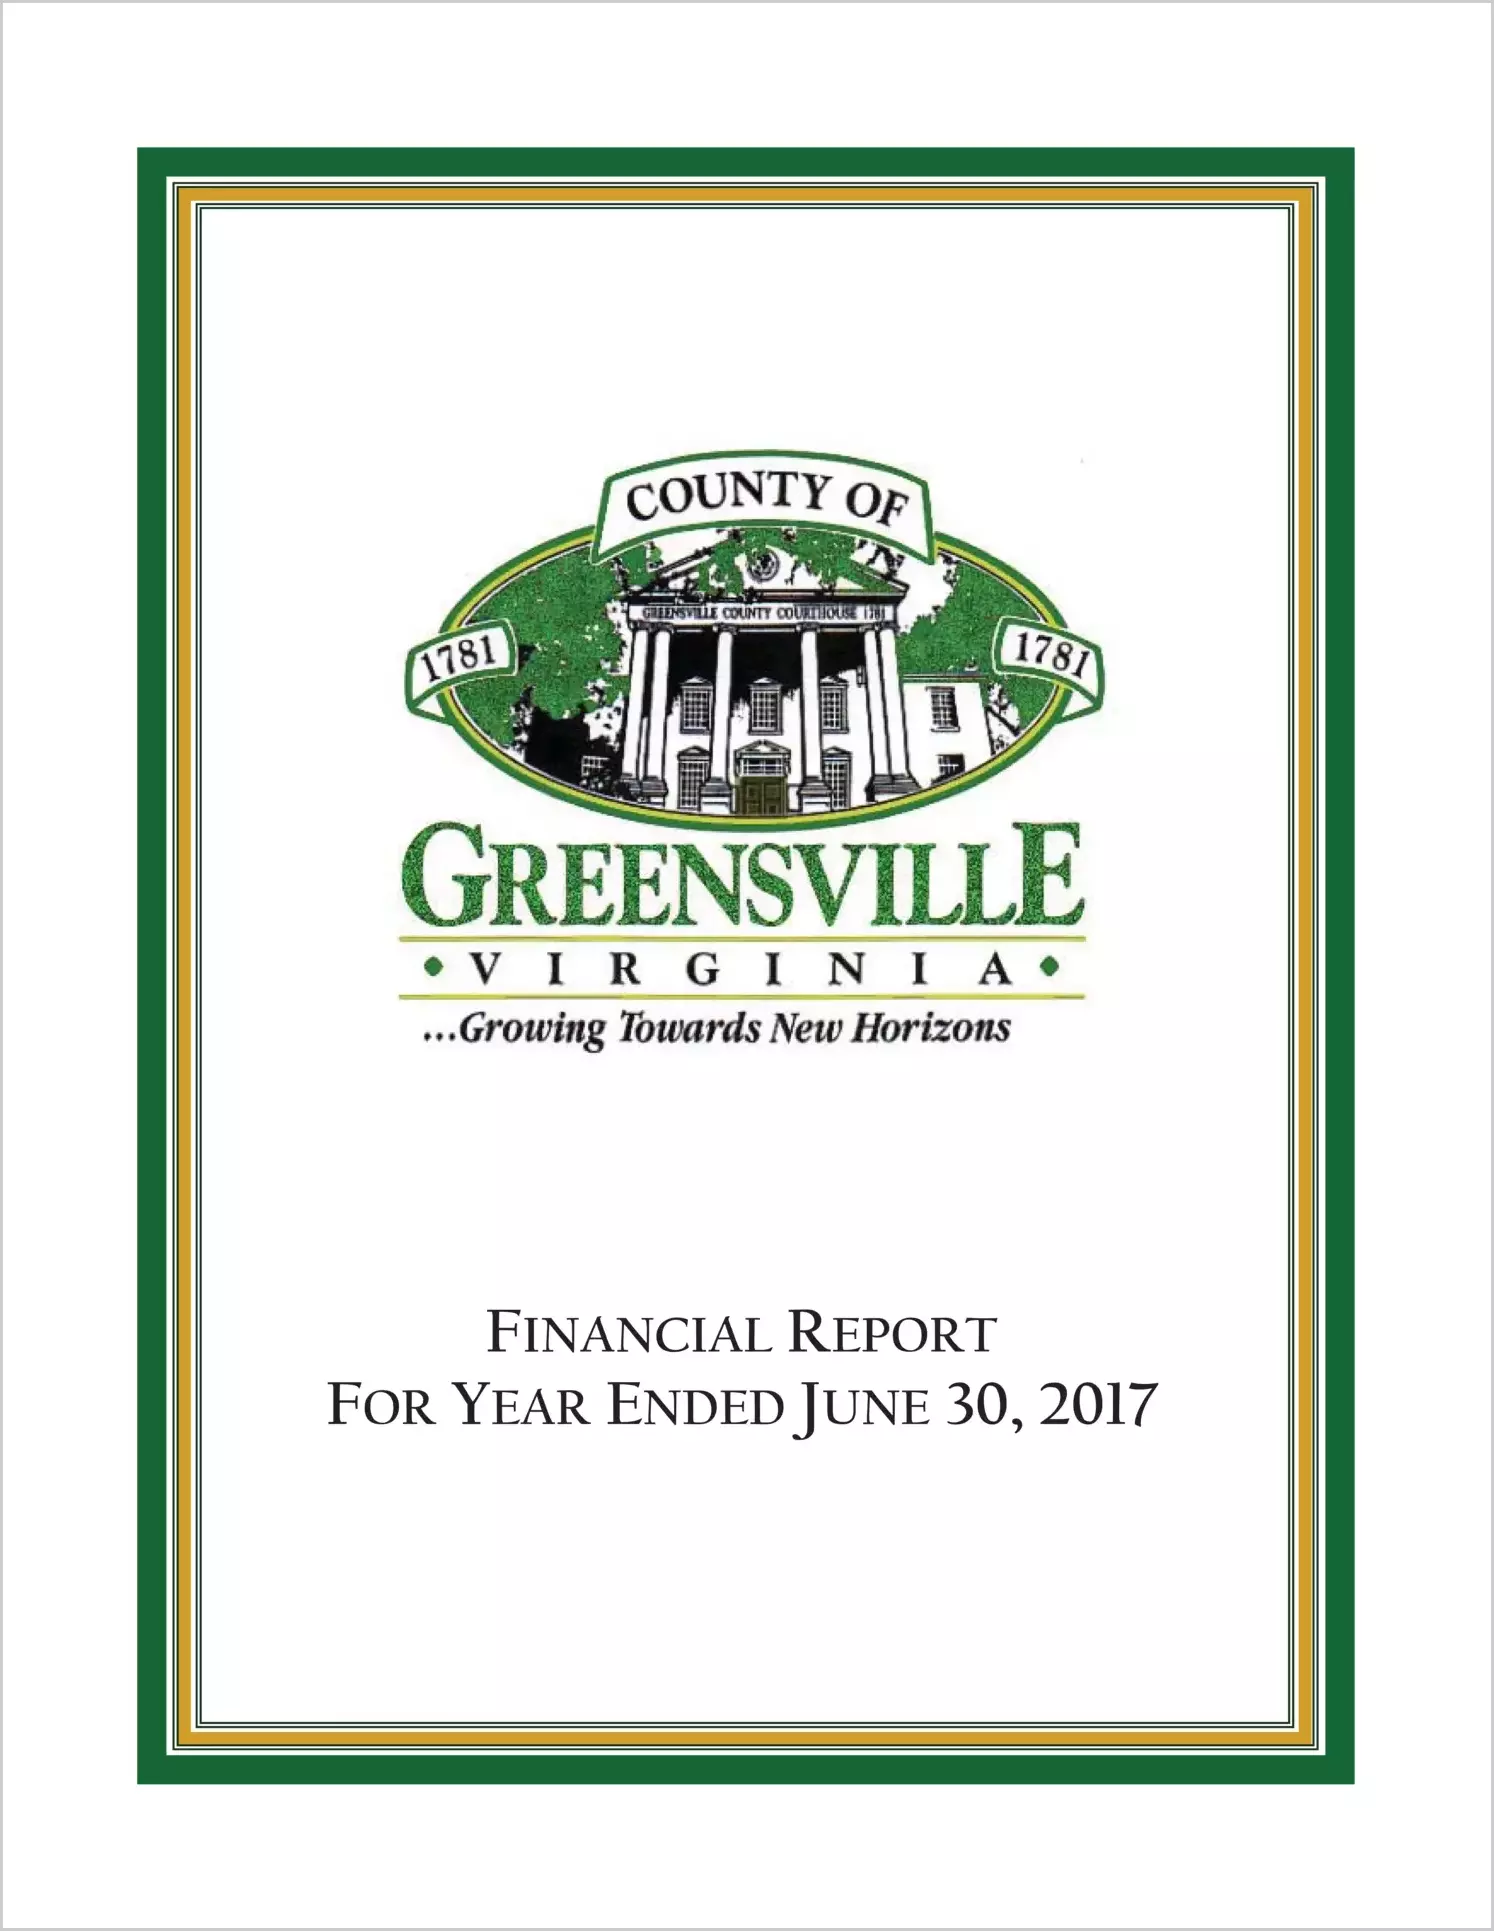 2017 Annual Financial Report for County of Greensville